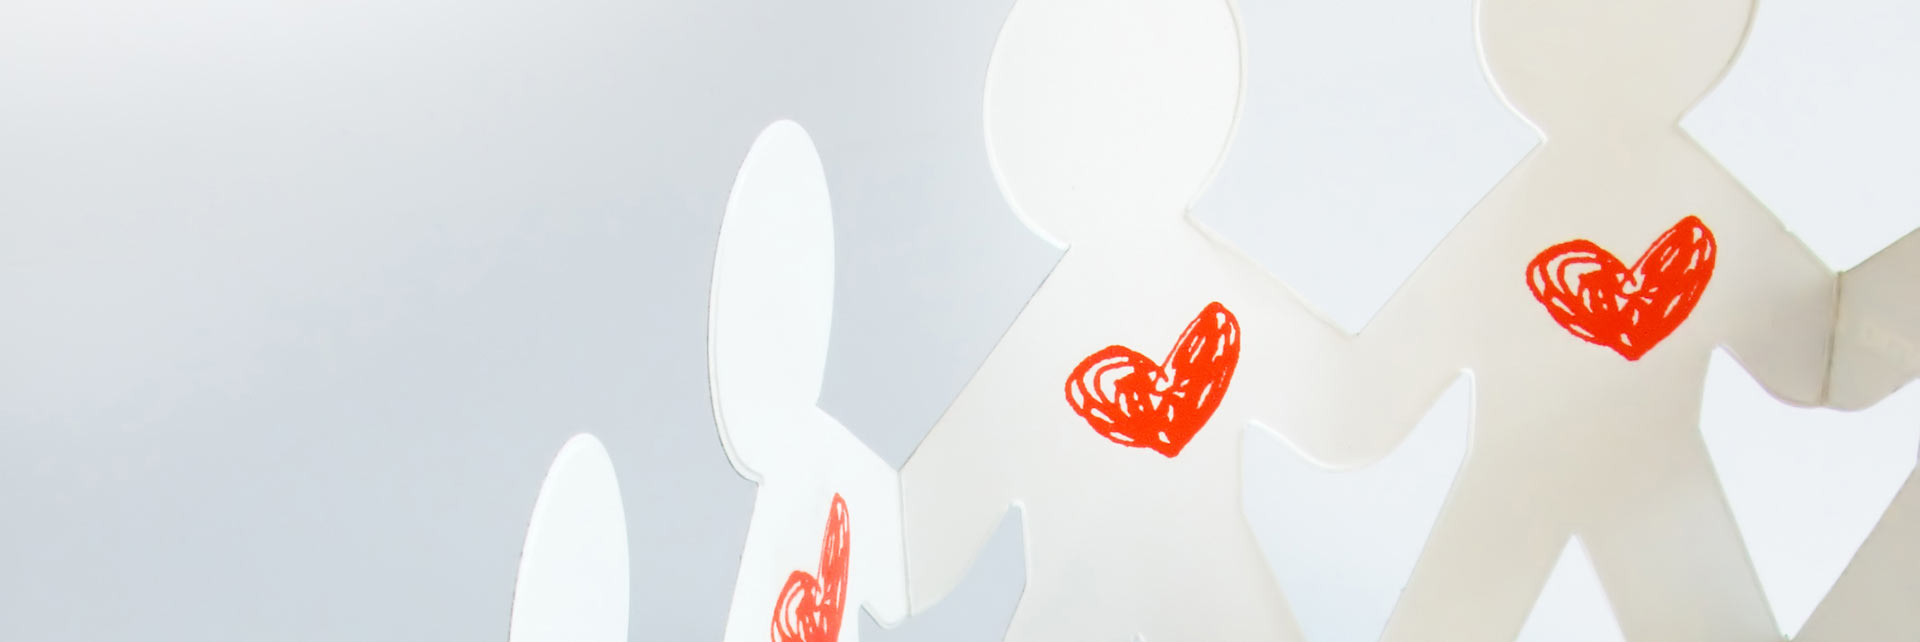 Cut out figures with red hearts